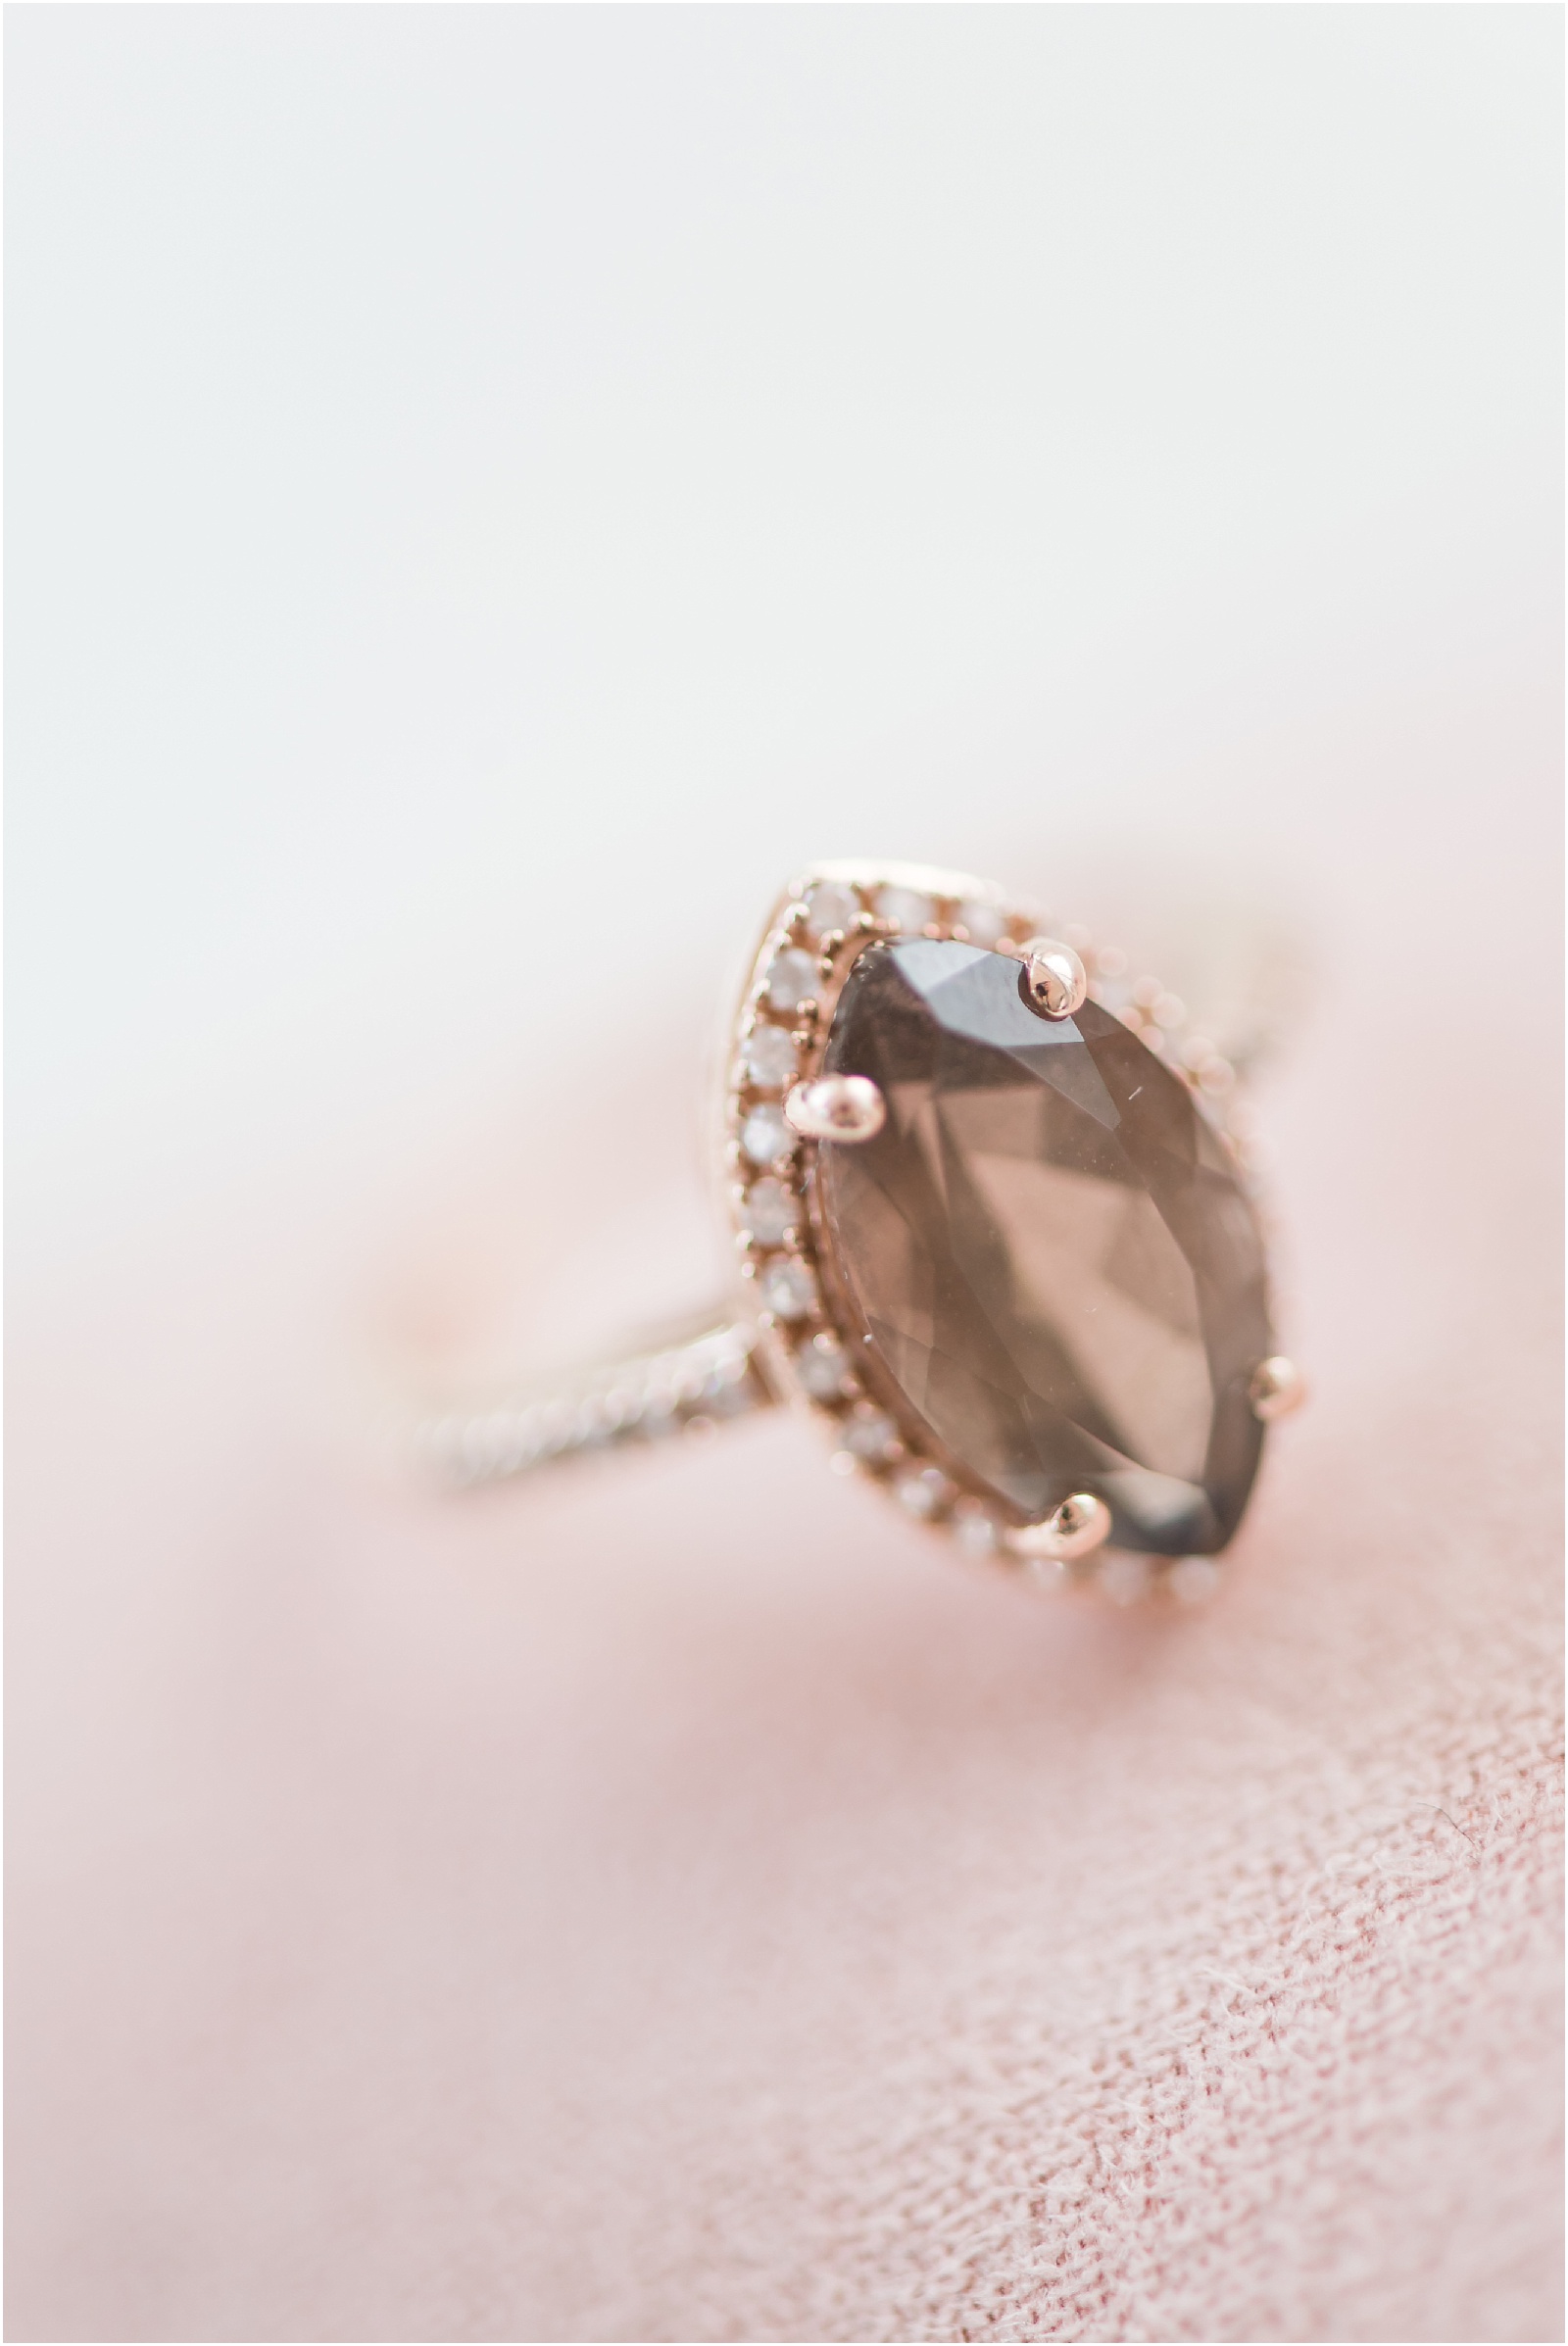 Antique engagement ring with a dark stone surrounded by diamonds at the glass box